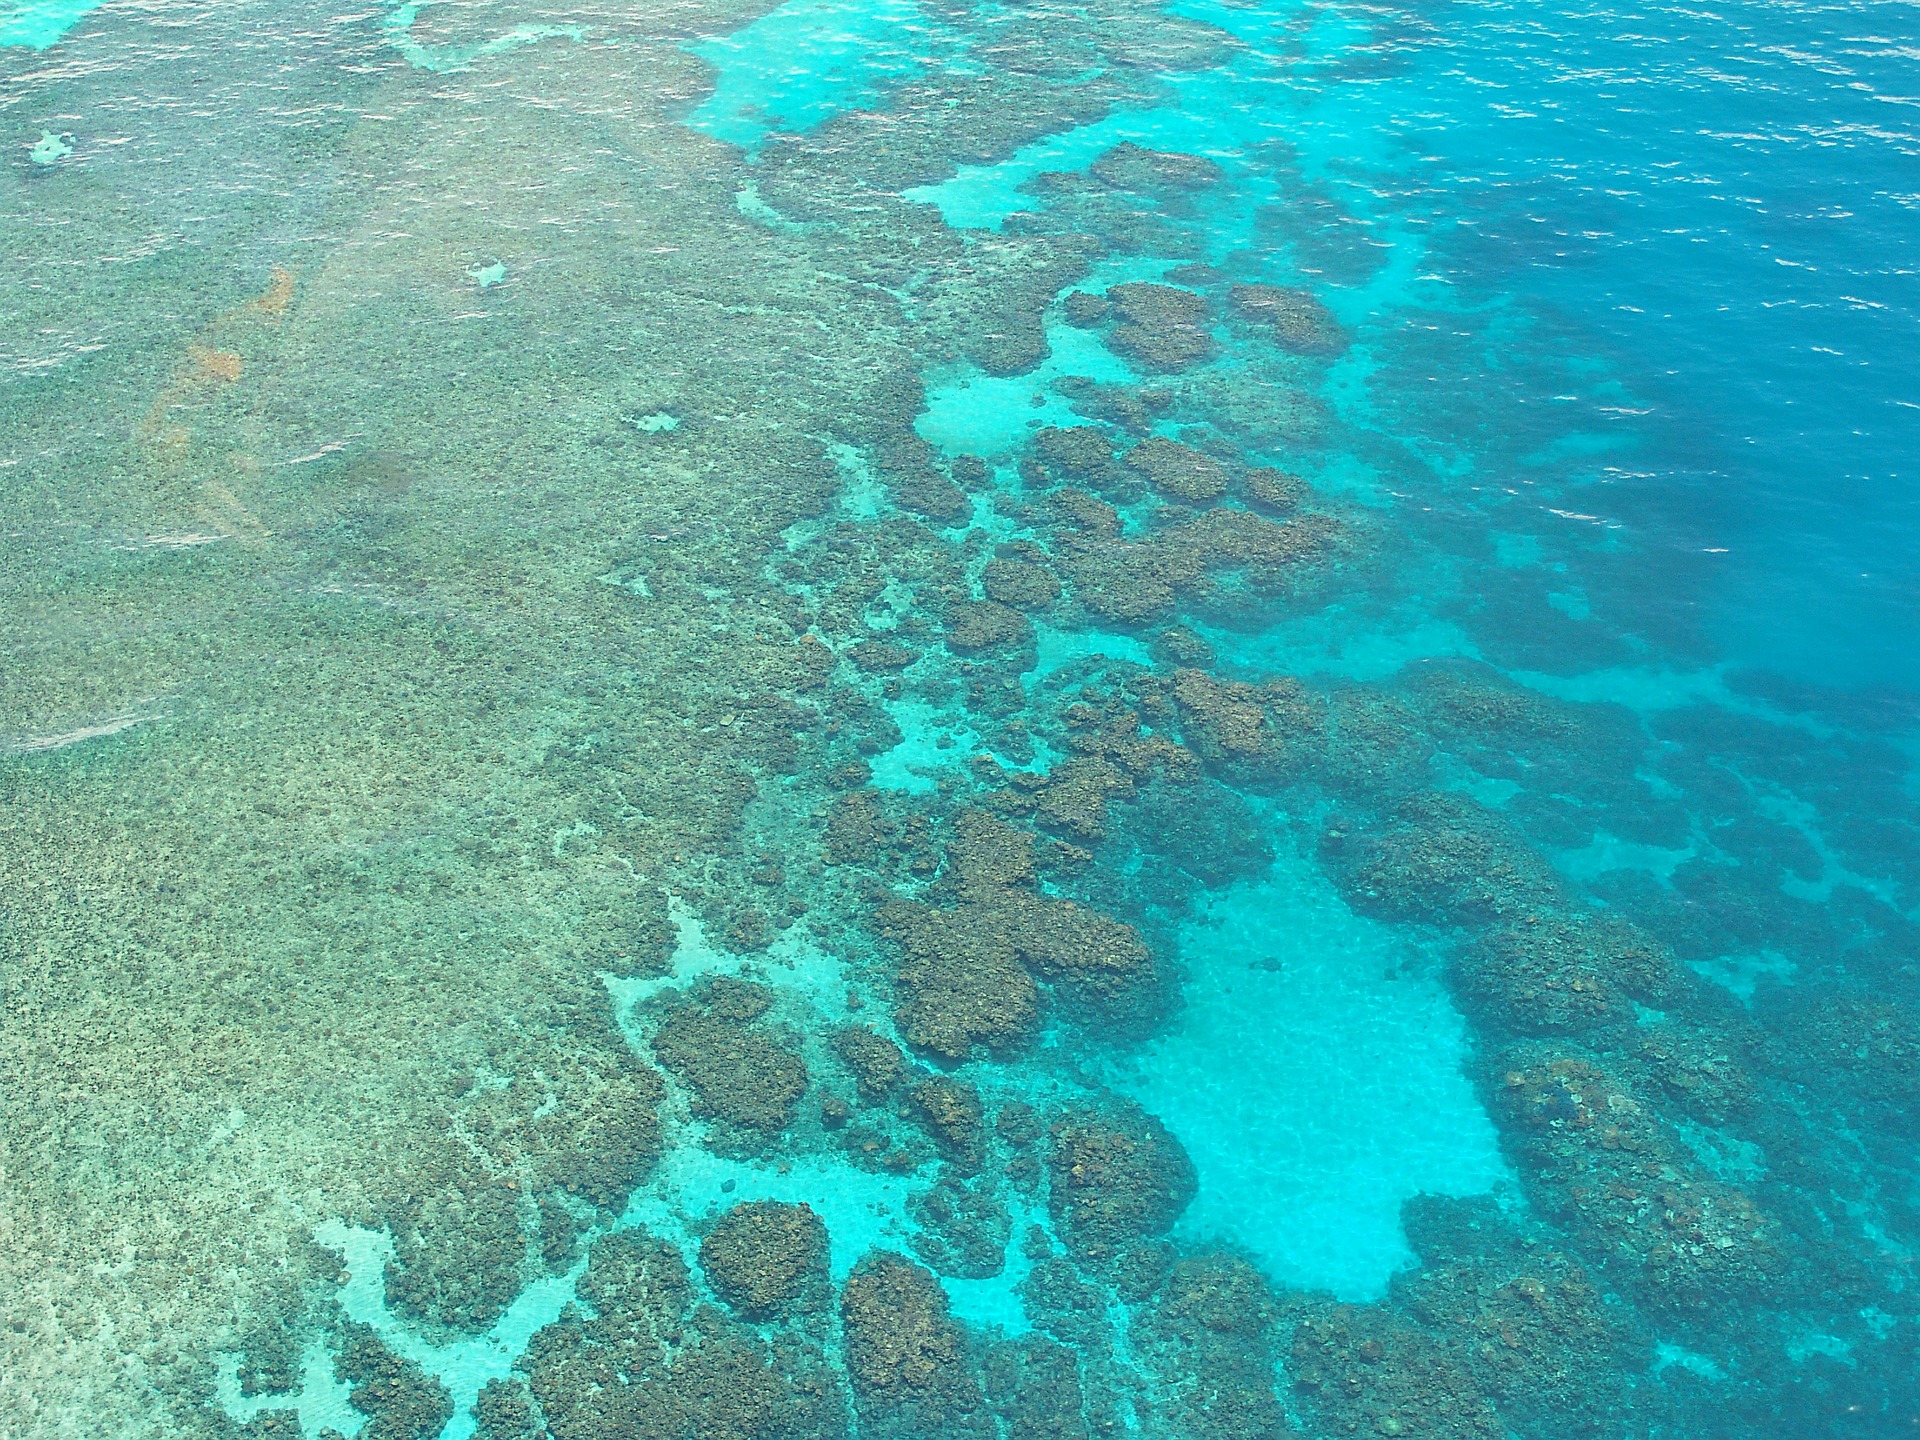 Great Barrier Reef from Above